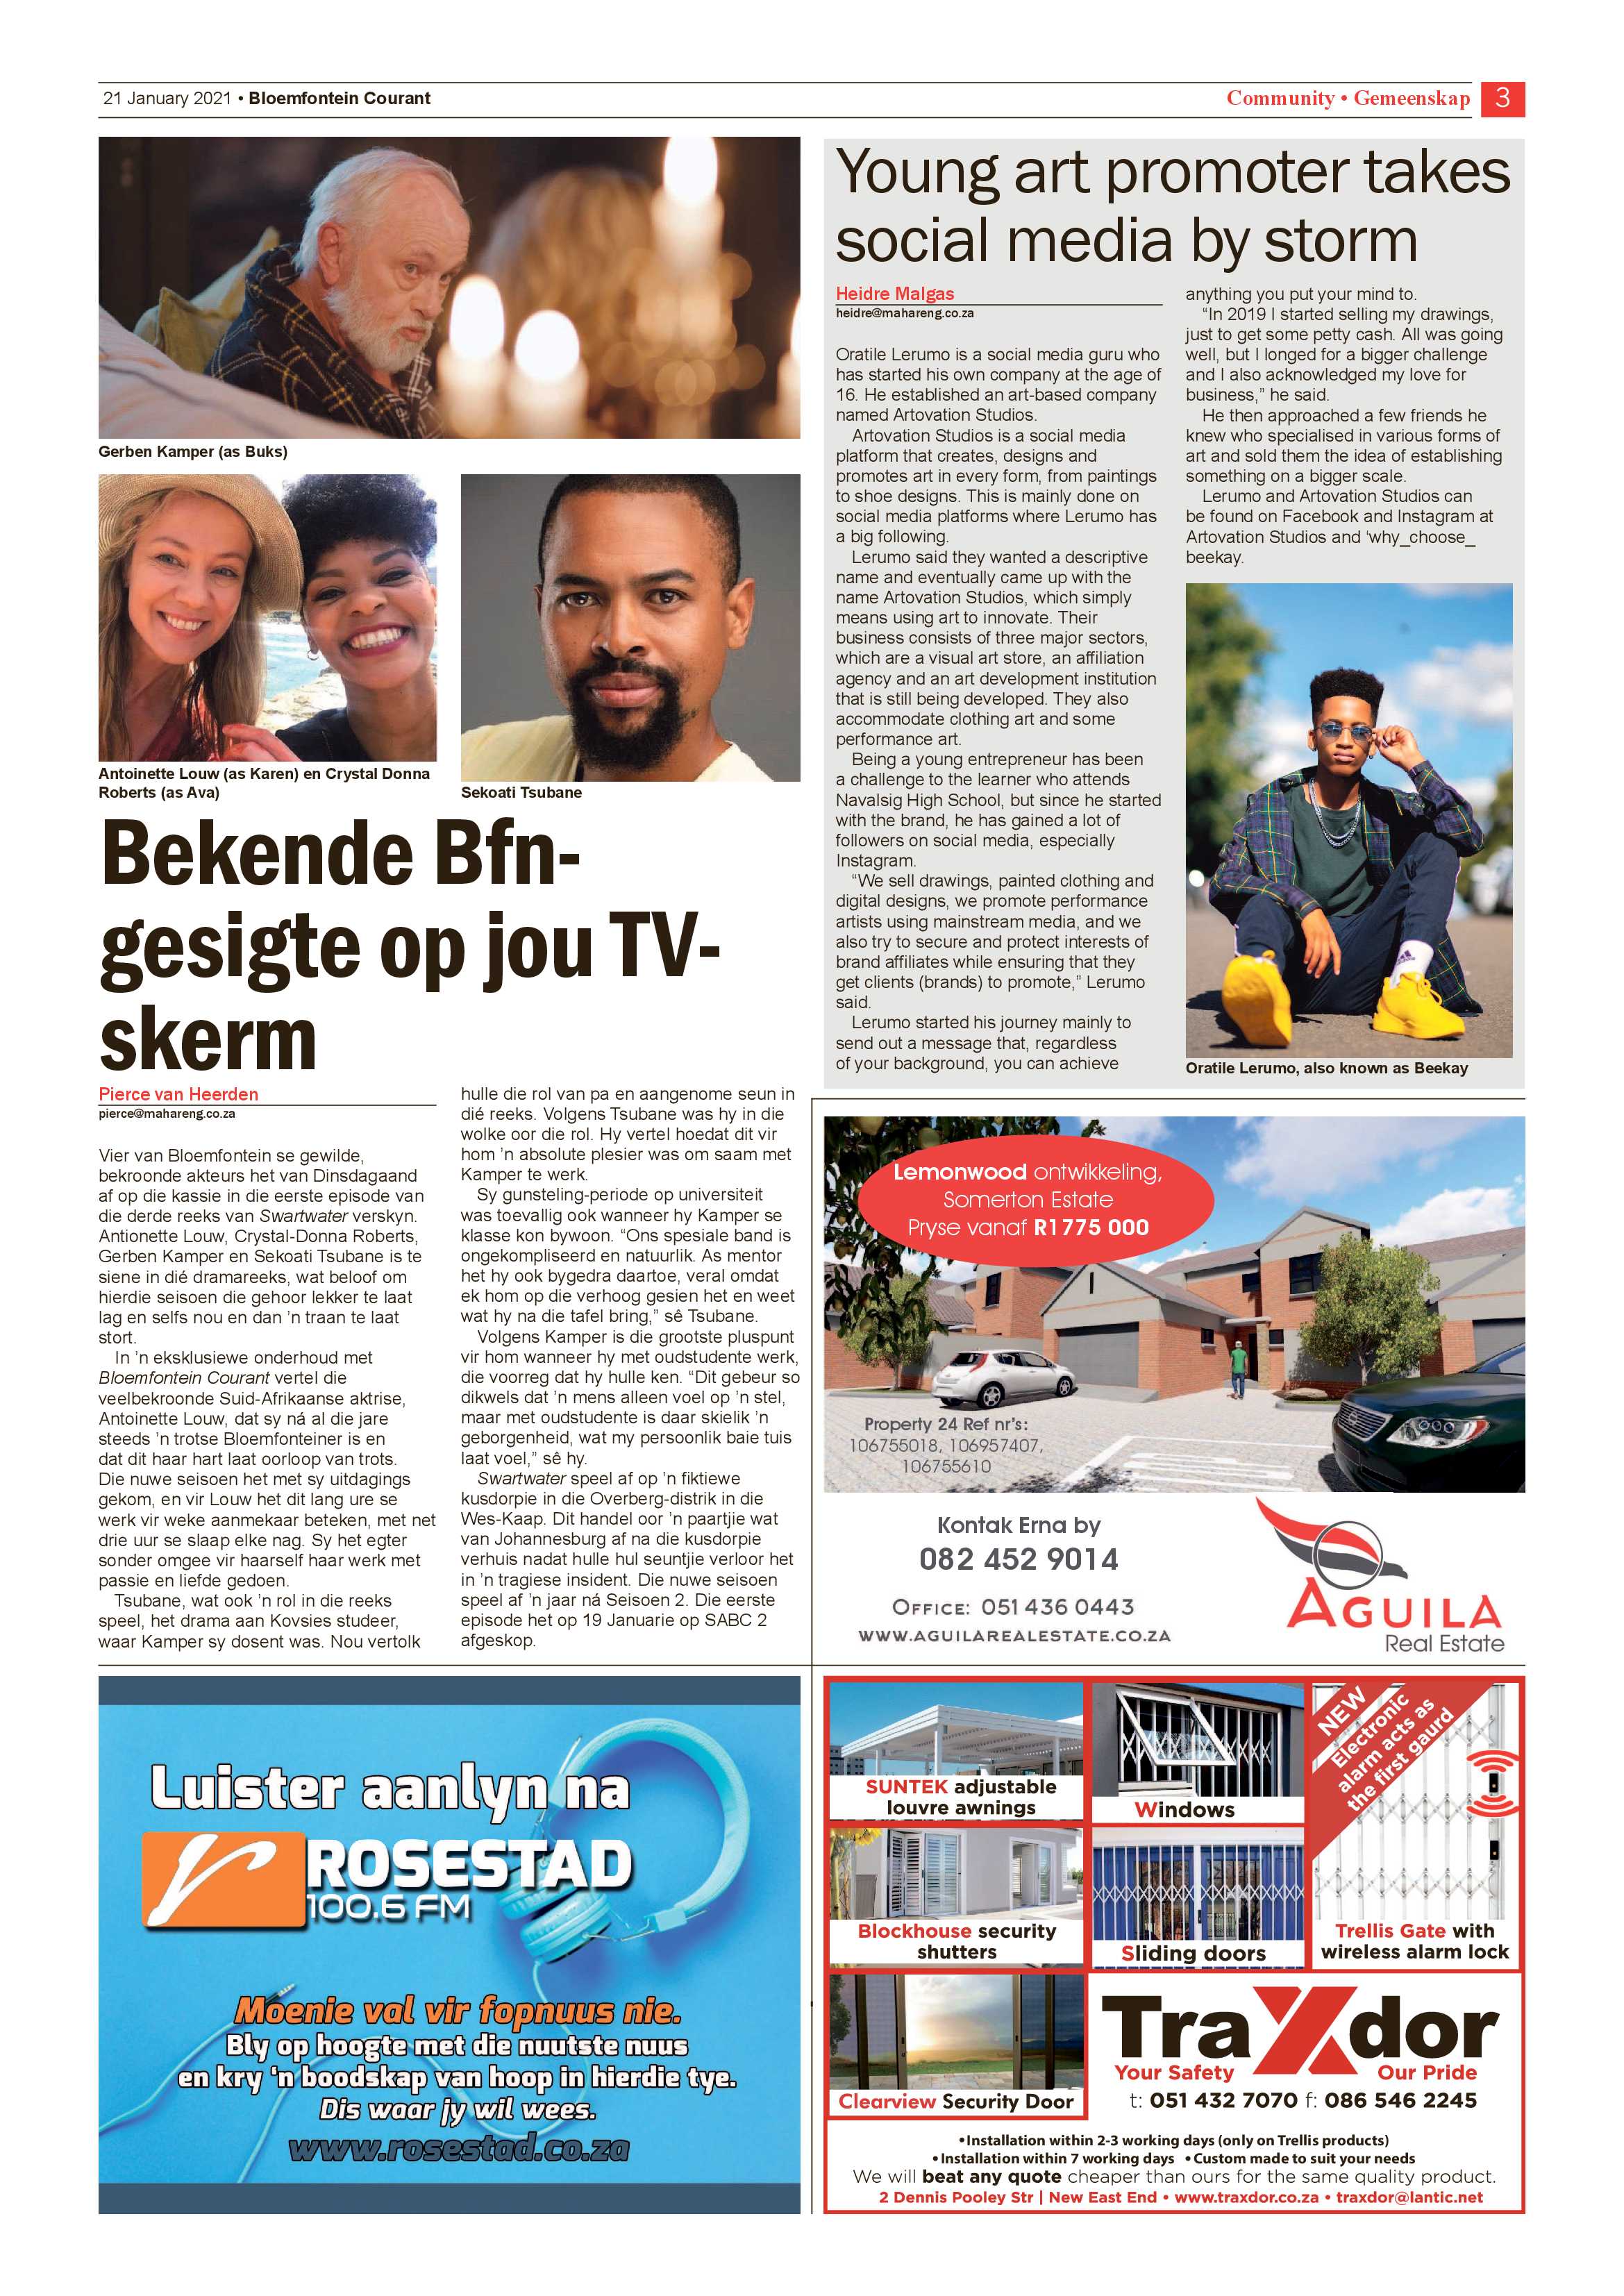 https-bloemfonteincourant-epaper-products-caxton-co-za-wp-content-ftp-epaper_uploads-86-bloemfontein_courant_21_january_2021-bloemfontein_courant_21_january_2021-5-pdfpg12-epapers-page-3